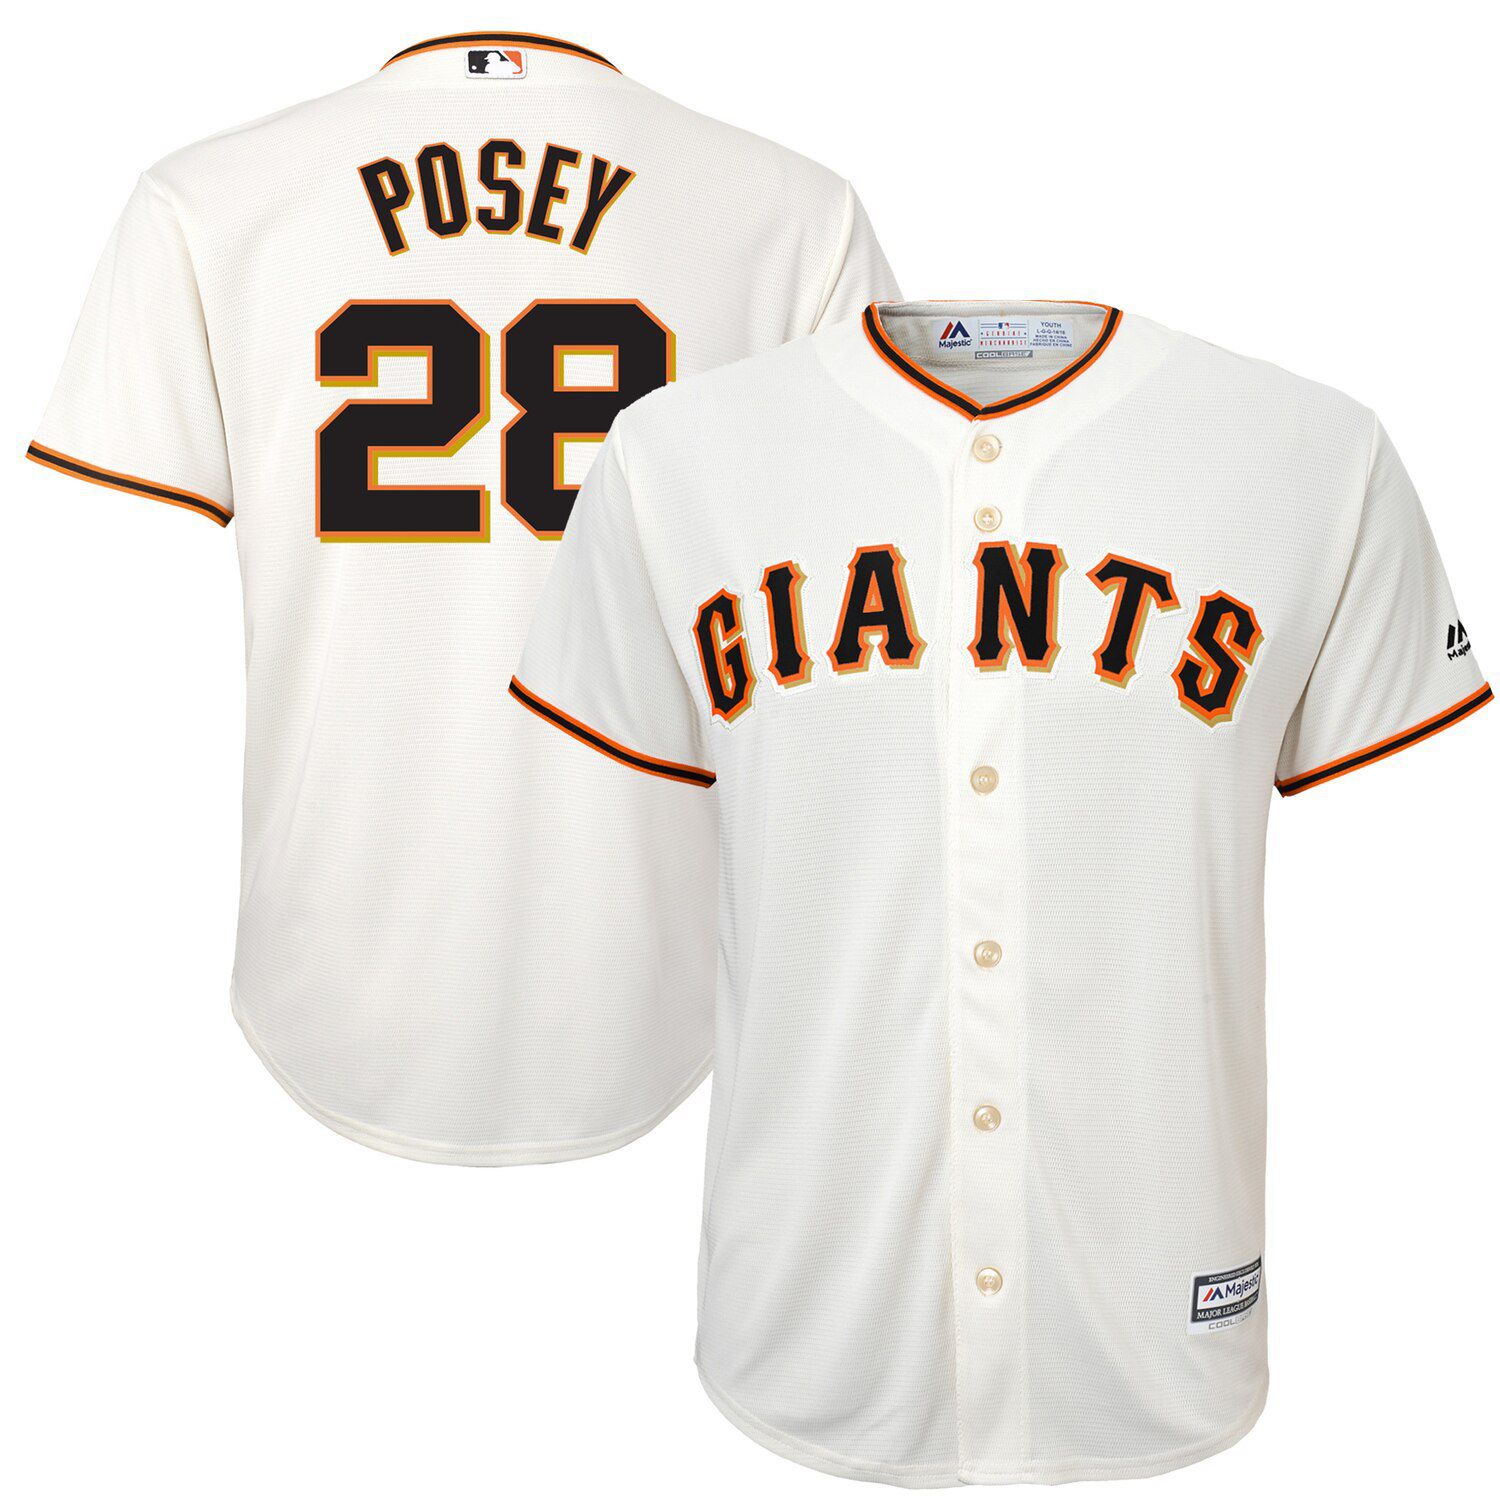 youth posey jersey